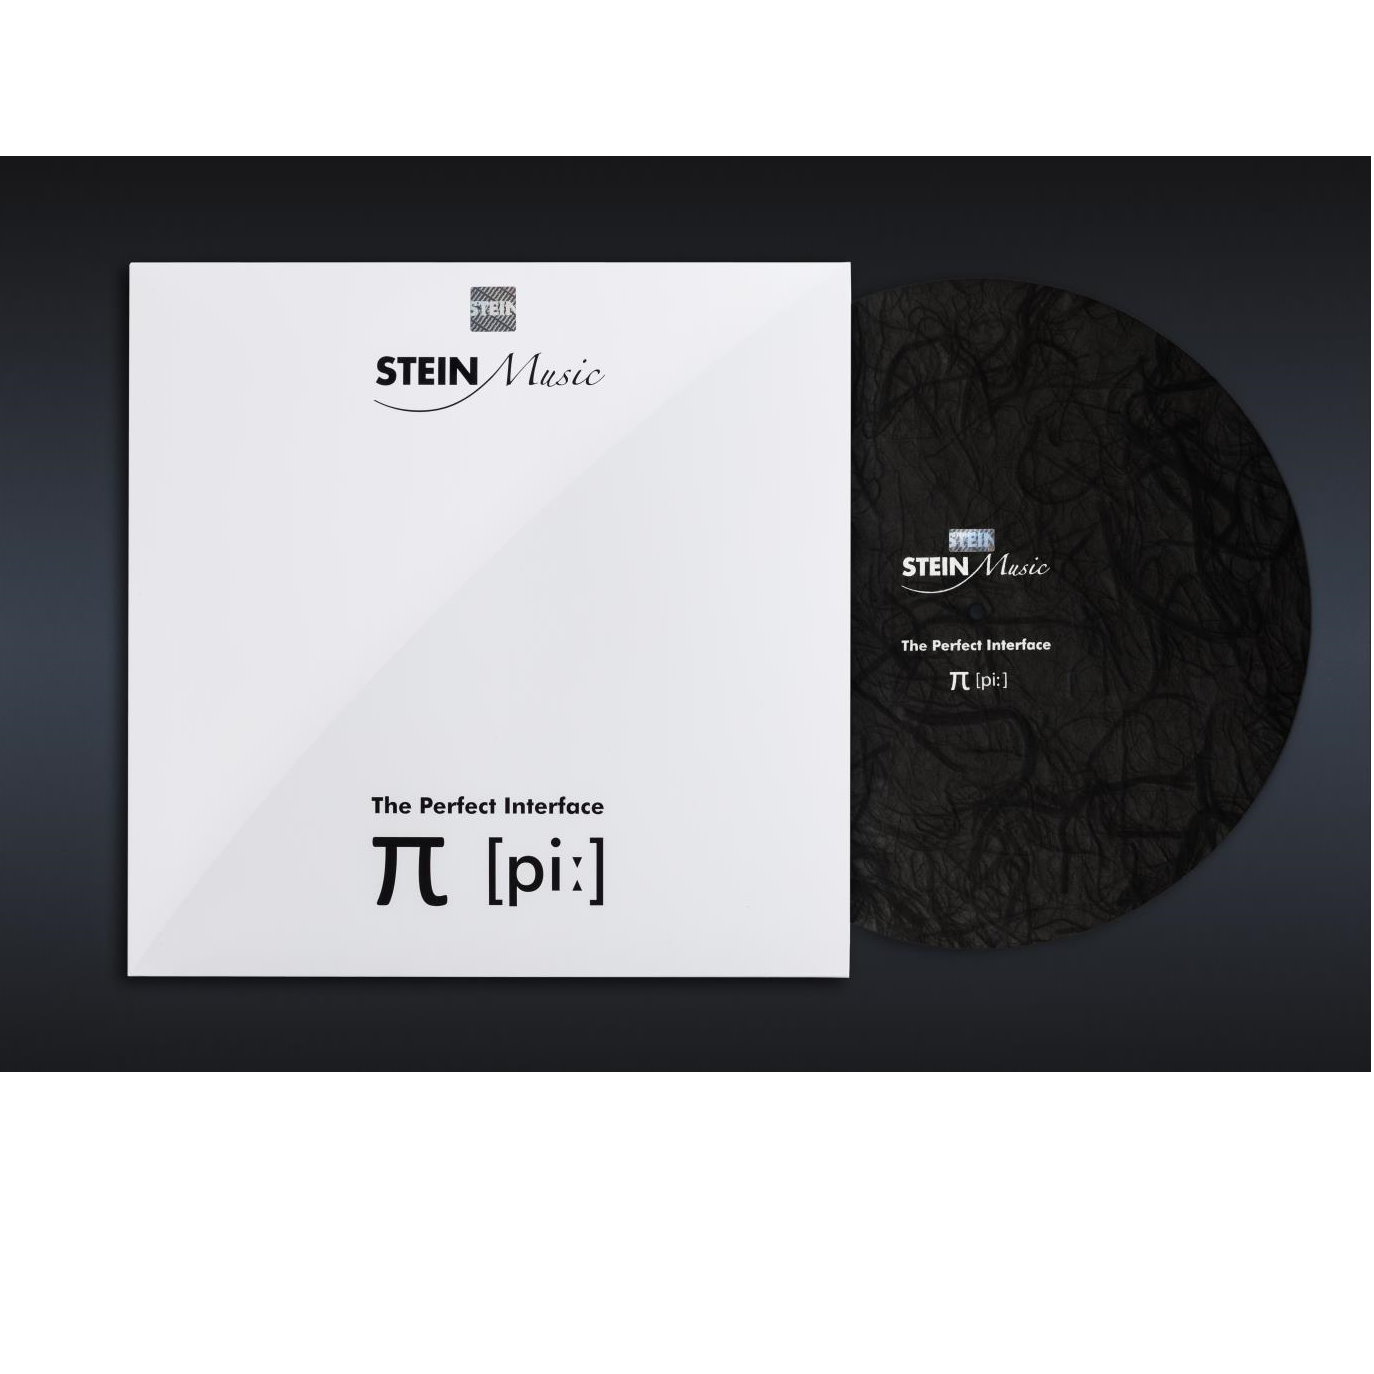 Stein Music The Perfect Interface π [piː] Carbon Signature Turntable Mat